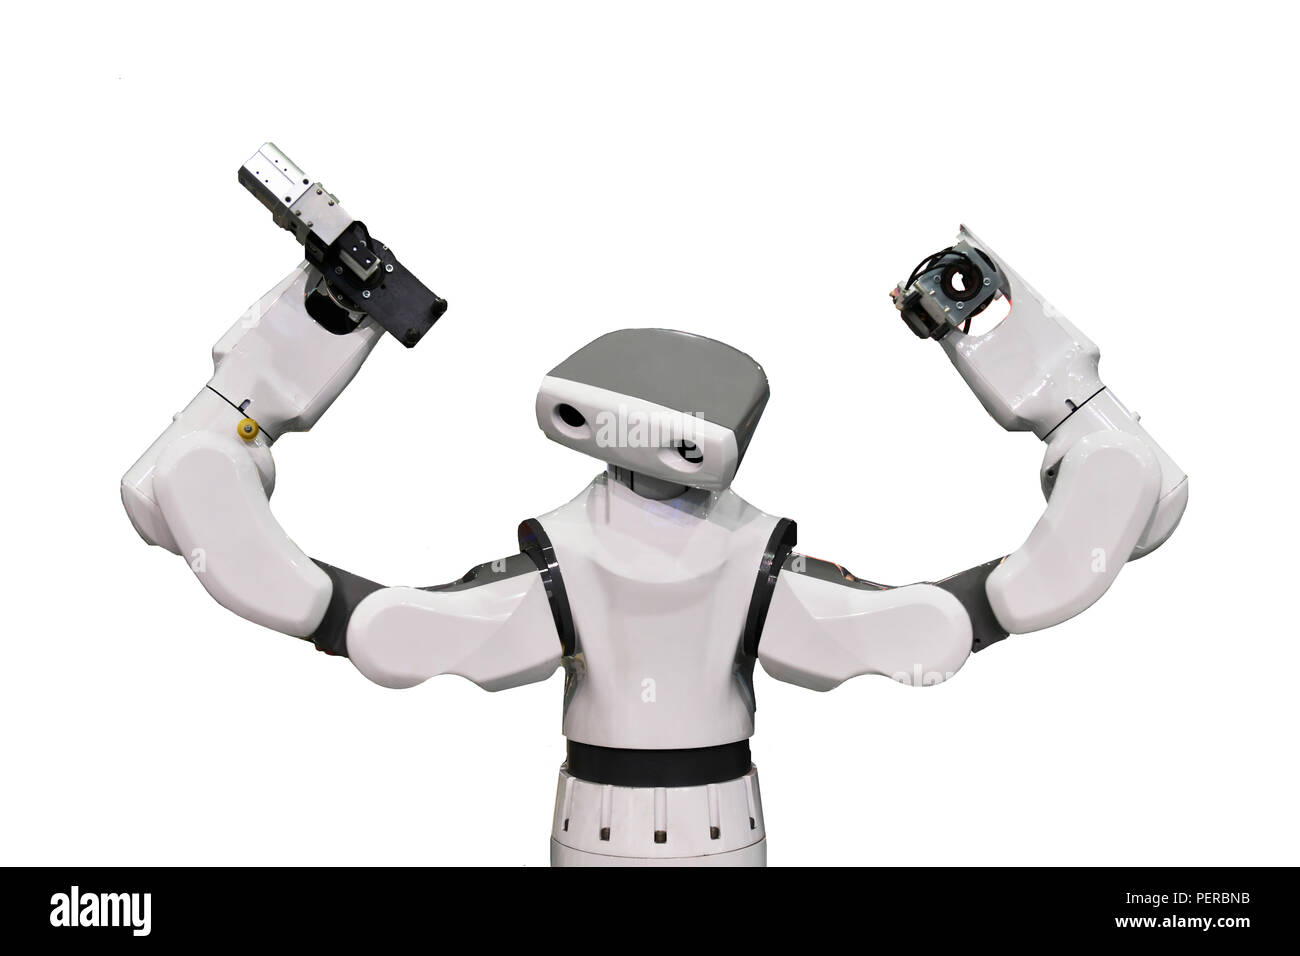 Modern Robot on white background with clipping path, Industry Robot concept . Stock Photo